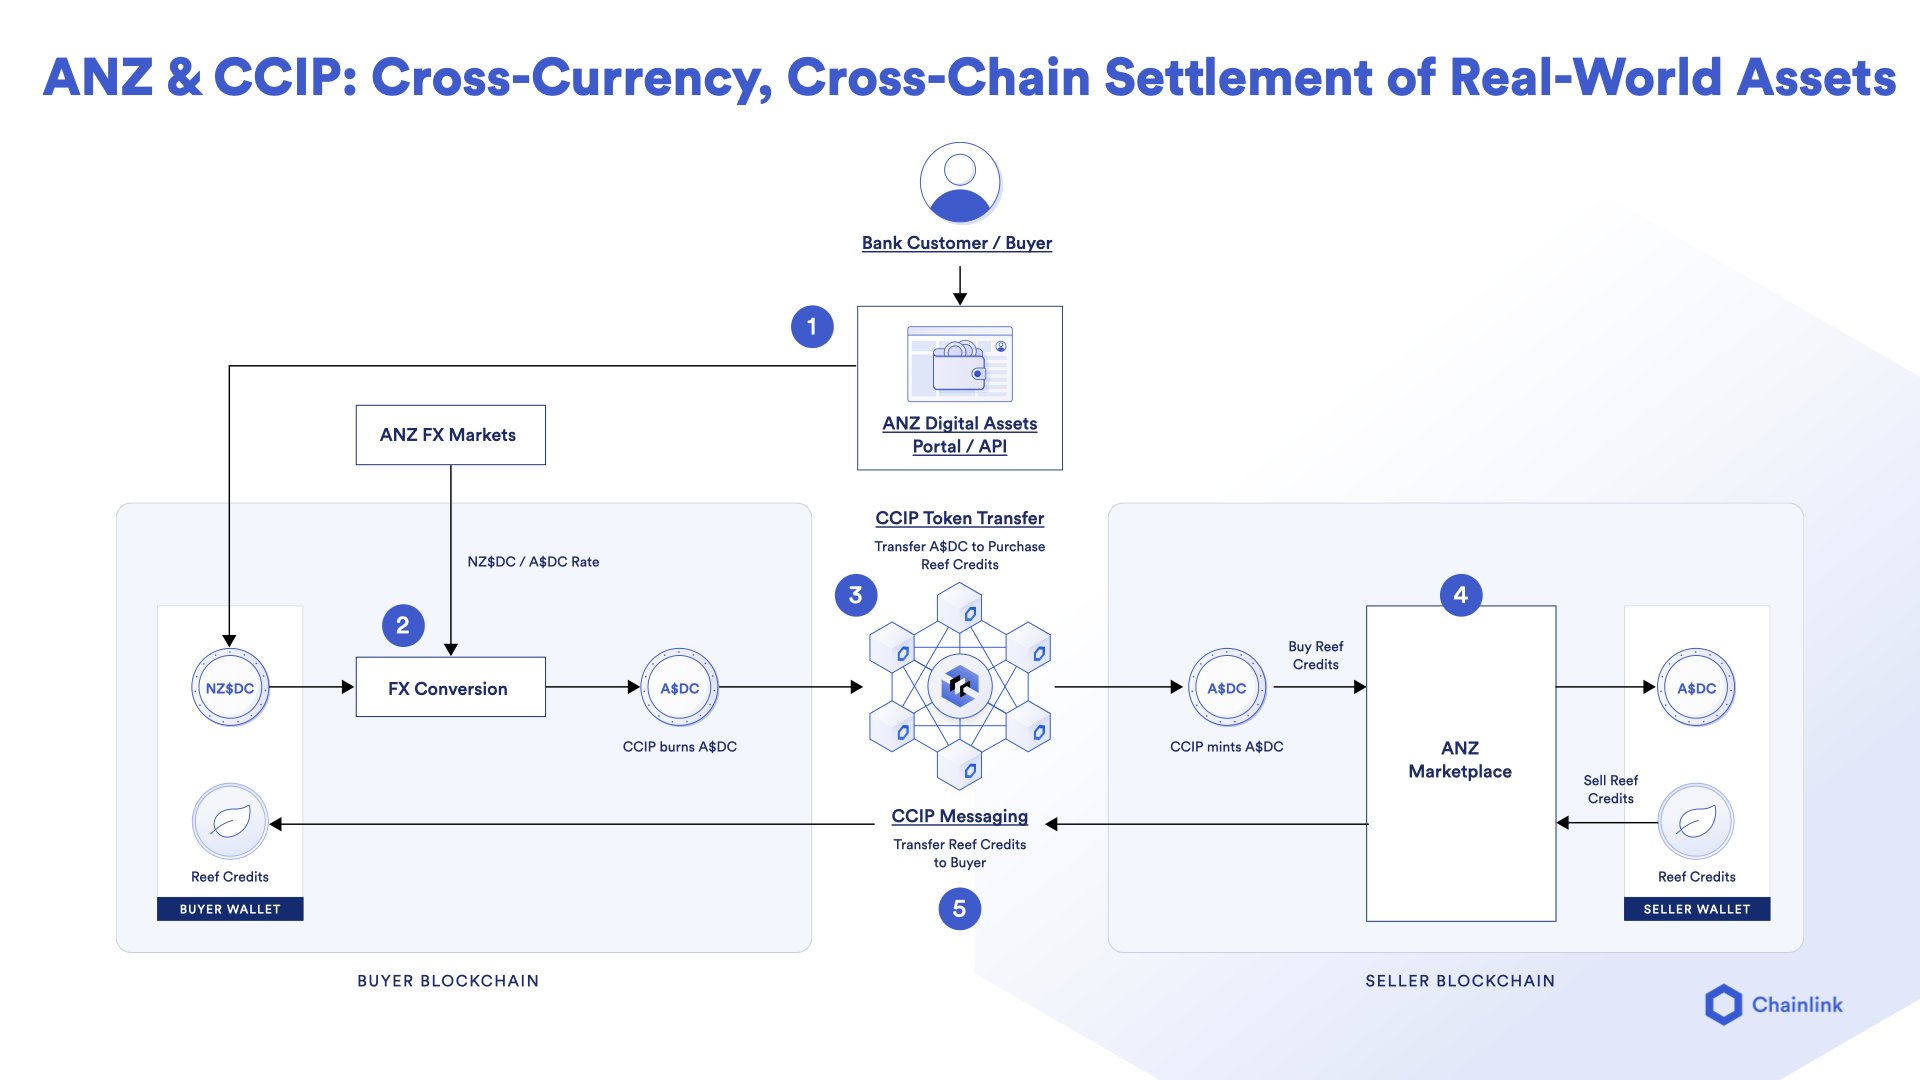 ANZ & CCIP: Cross-Currency, Cross-Chain Settlement of Real-World Assets.